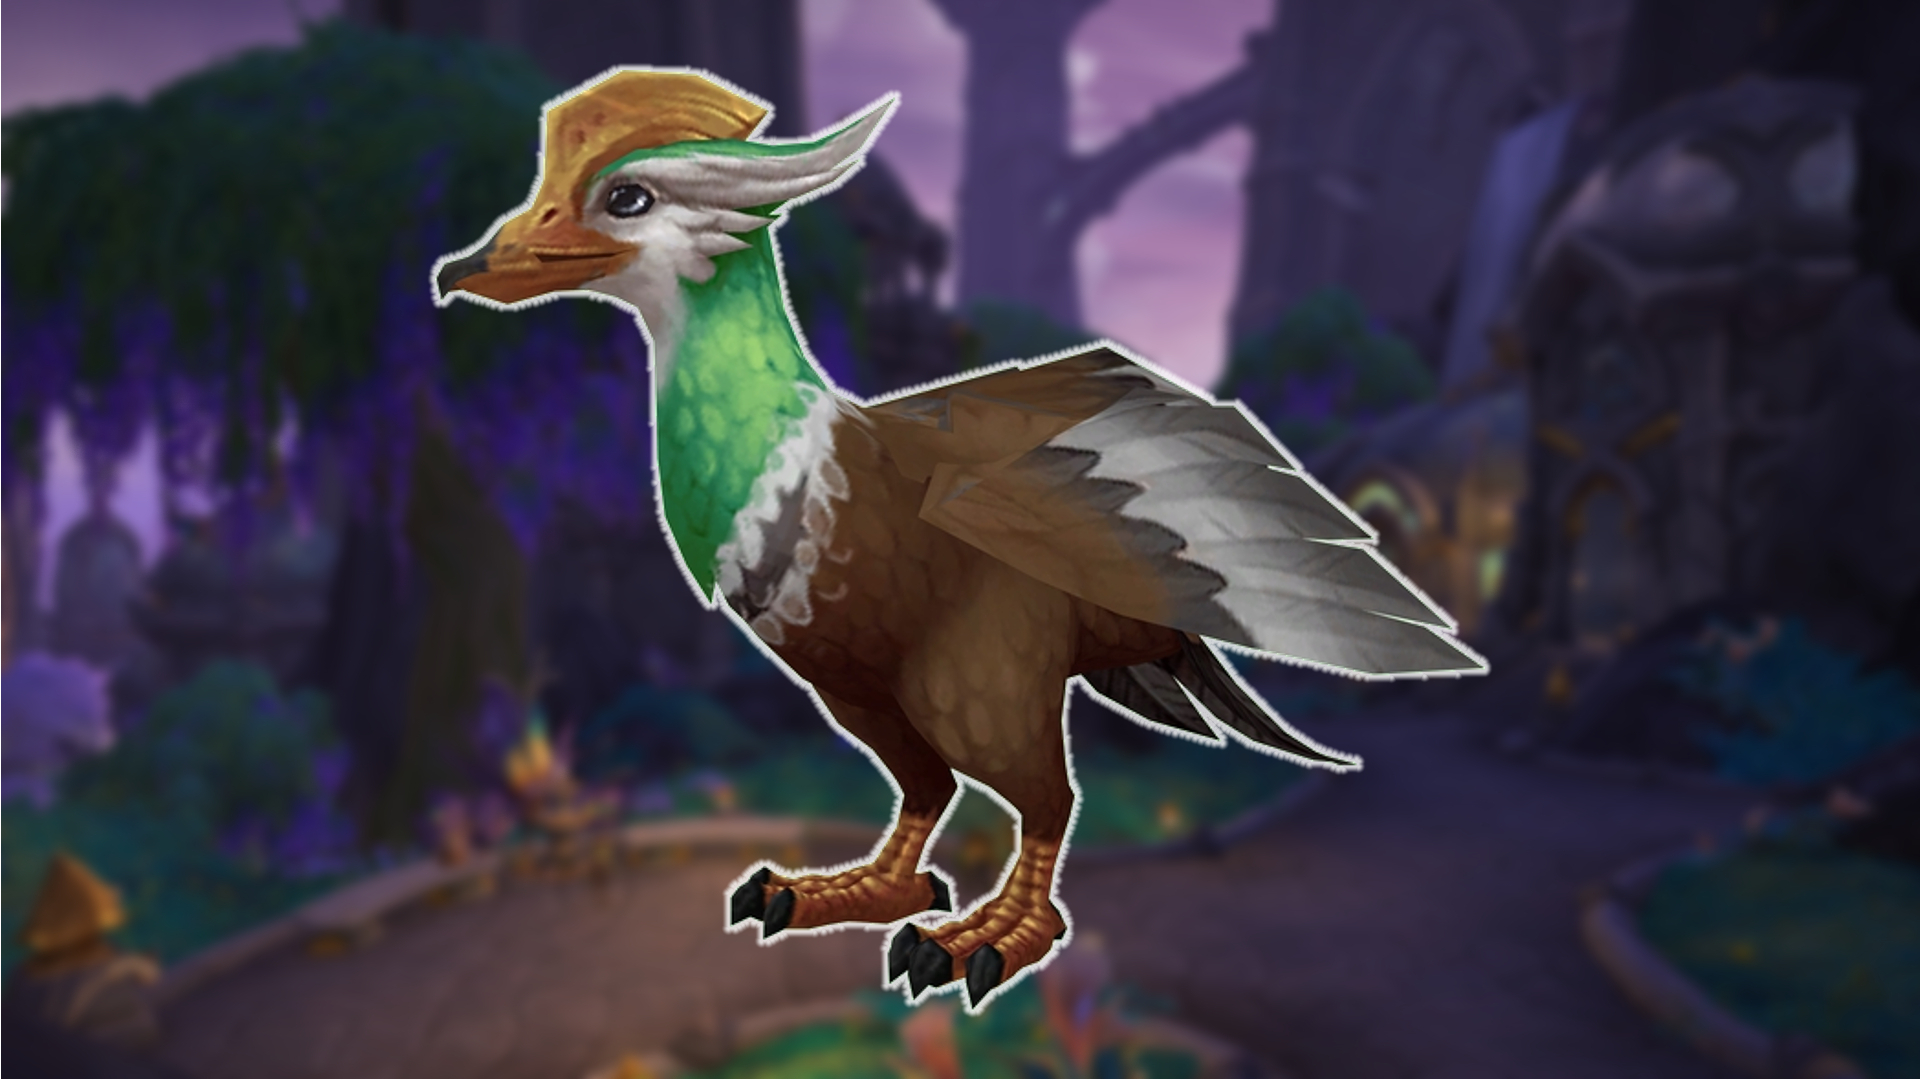 WoW Dragonflight gives Hunter adorable duck pets